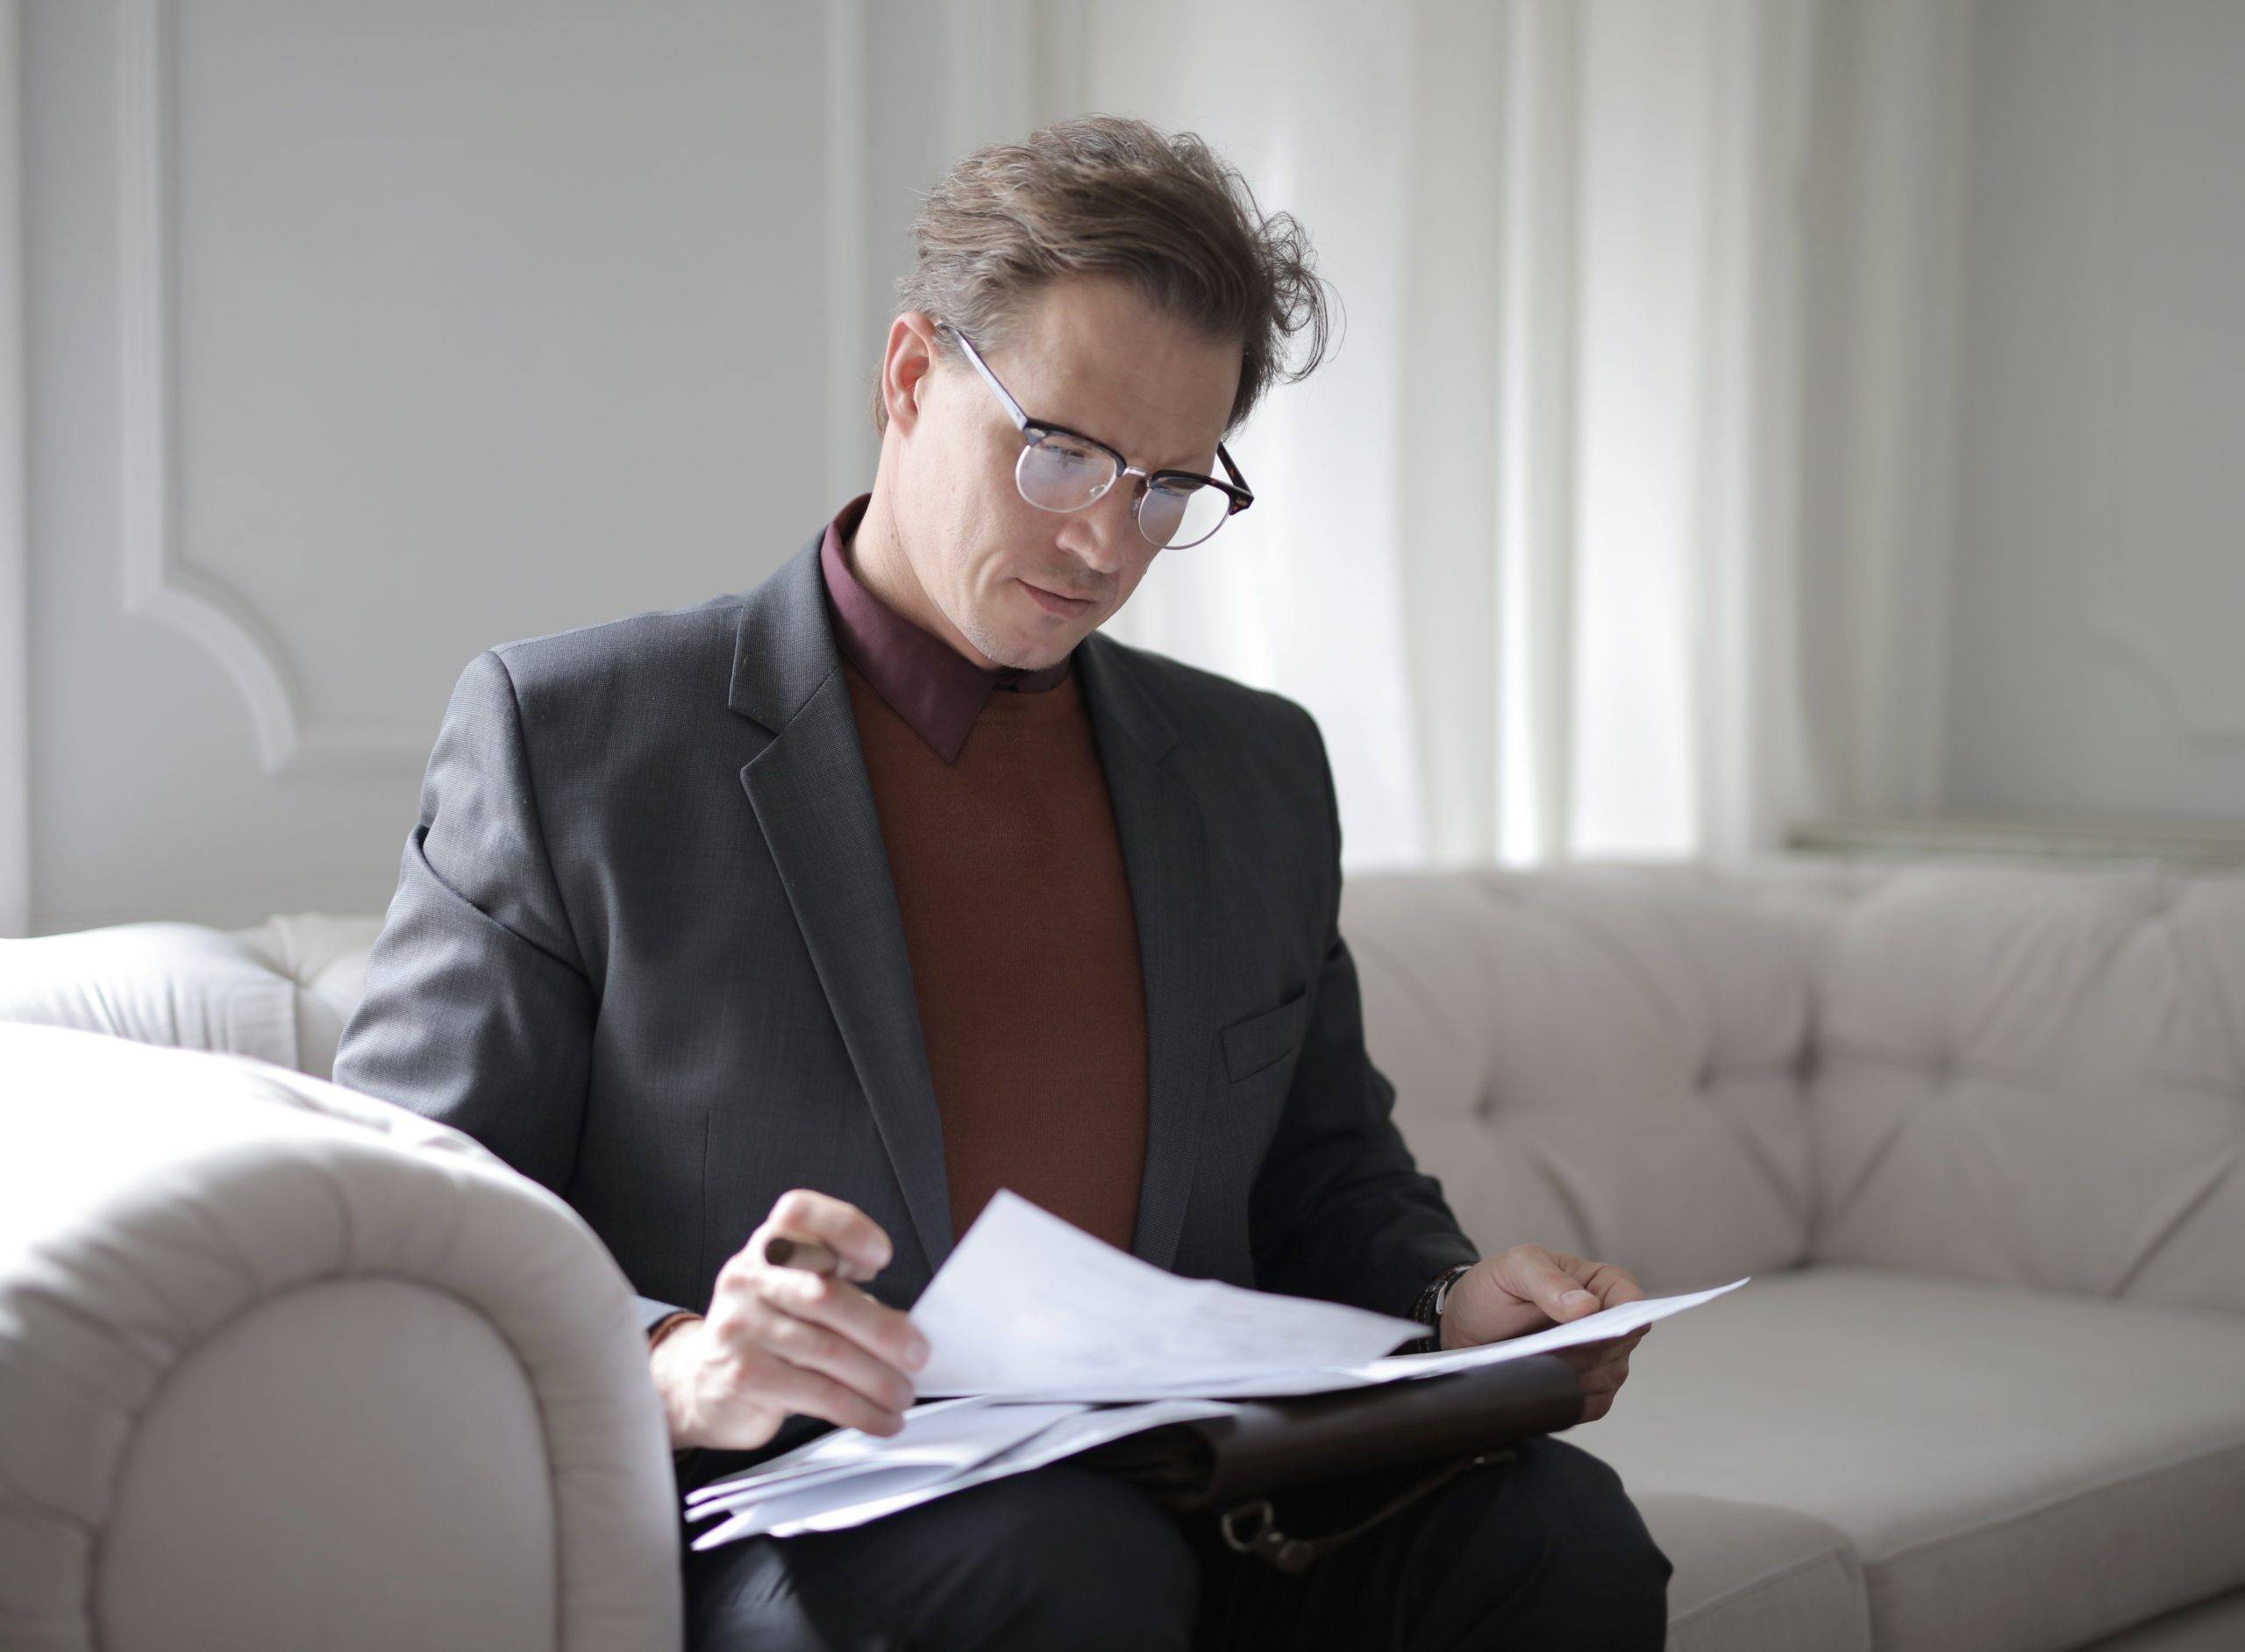 Adult man sitting on couch reviewing documents